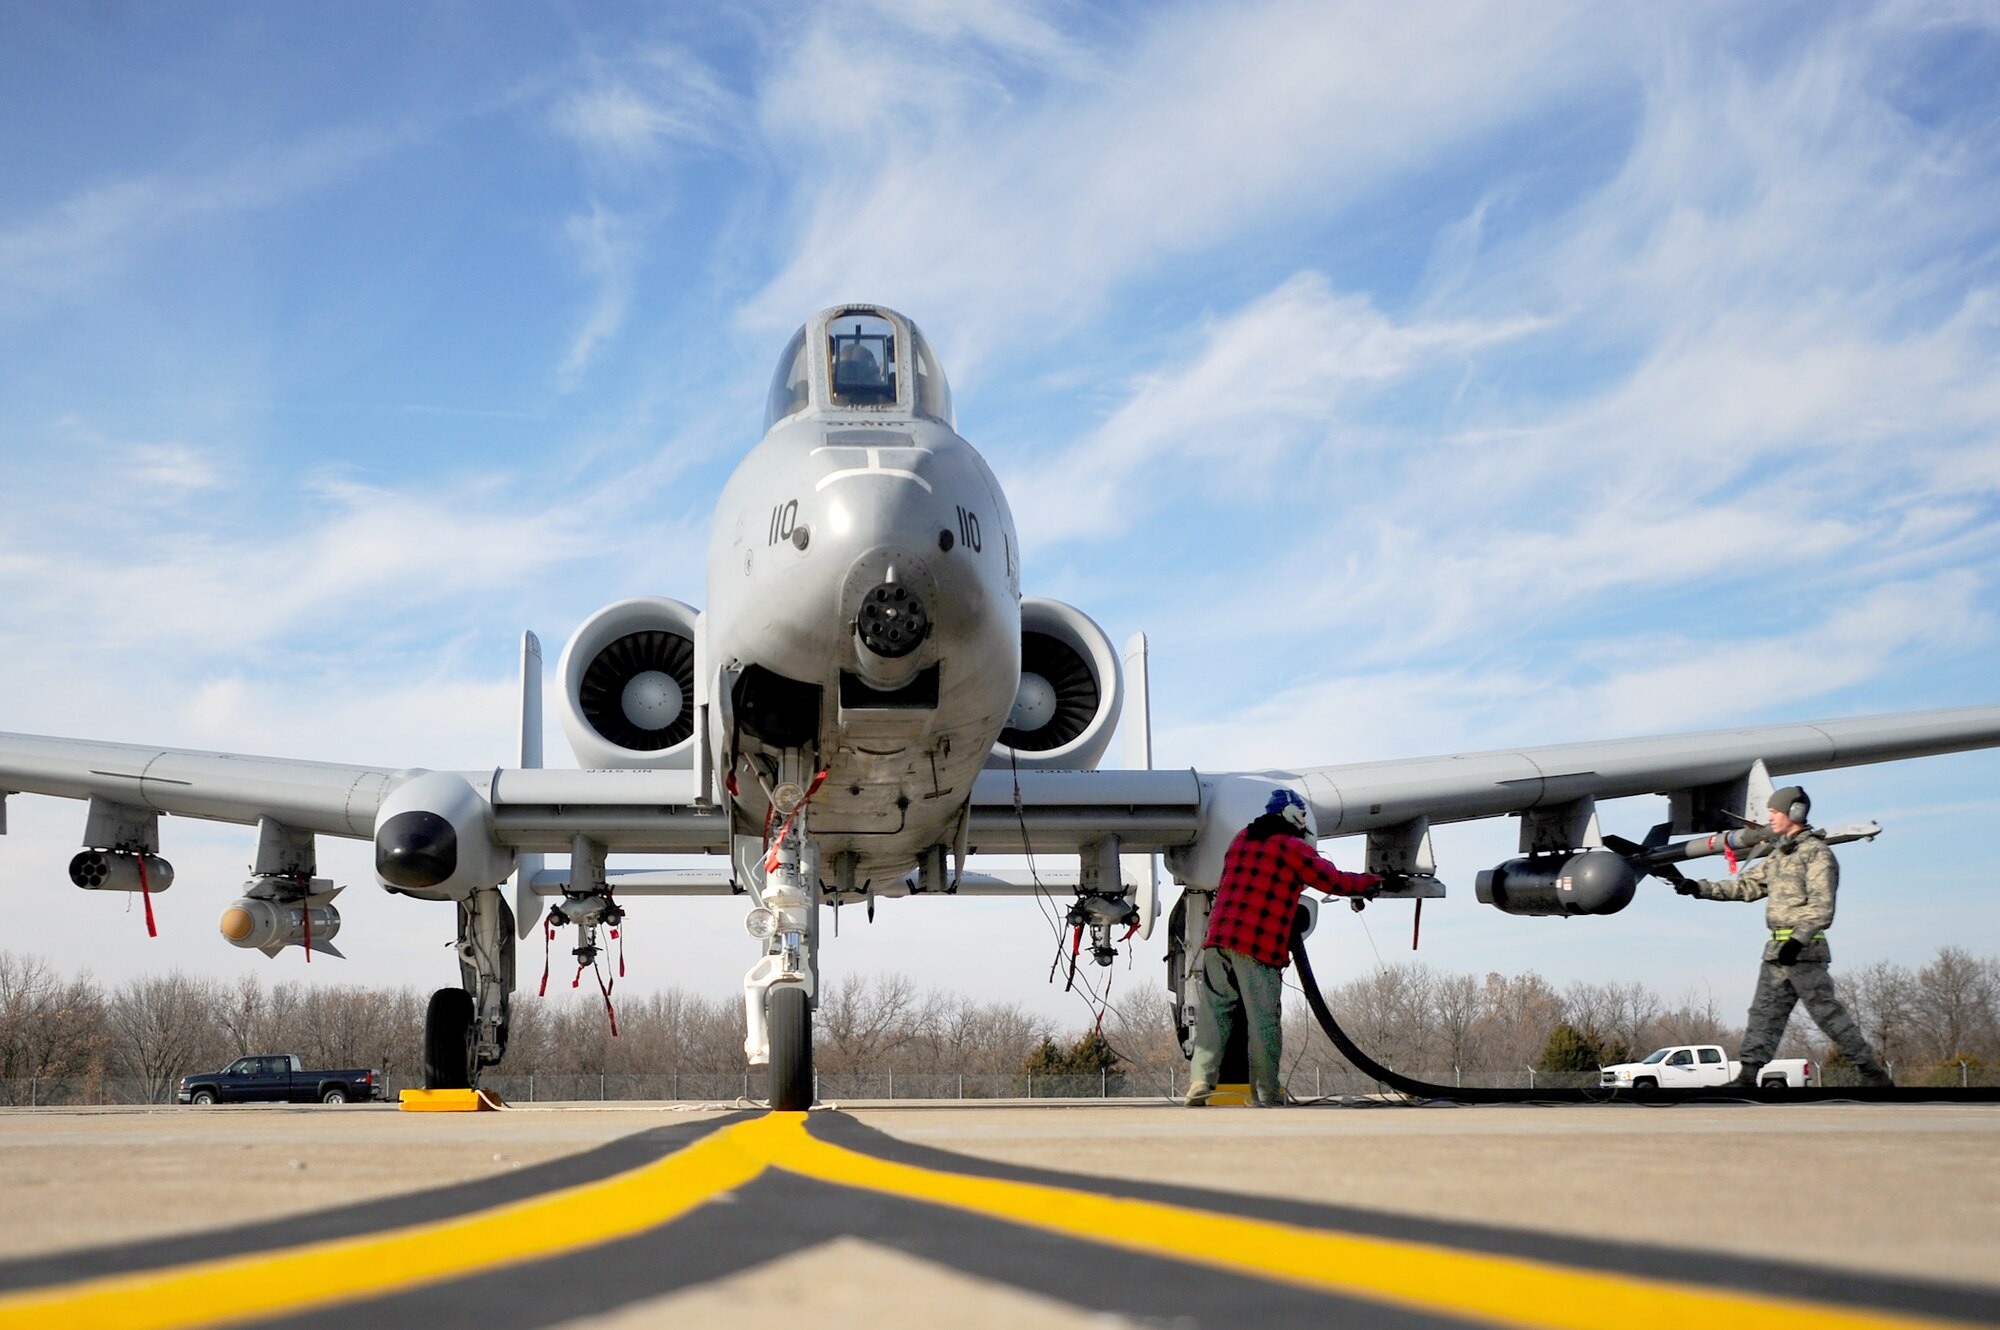 Dewayne Magnuson and Senior Airman James White work together to perform a hot pit refuel on an A-10 Thunderbolt II Dec. 8, 2010, at Whiteman Air Force Base, Mo.  The Air Force Reserve Command's 442nd Fighter Wing crews are practicing this procedure to keep their skills sharp. Mr Magnuson is an air reserve technician with the 442nd FW and Airman White is a fuels operator with the 509th Logistics Readiness Squadron. (U.S. Air Force photo/Senior Airman Kenny Holston)